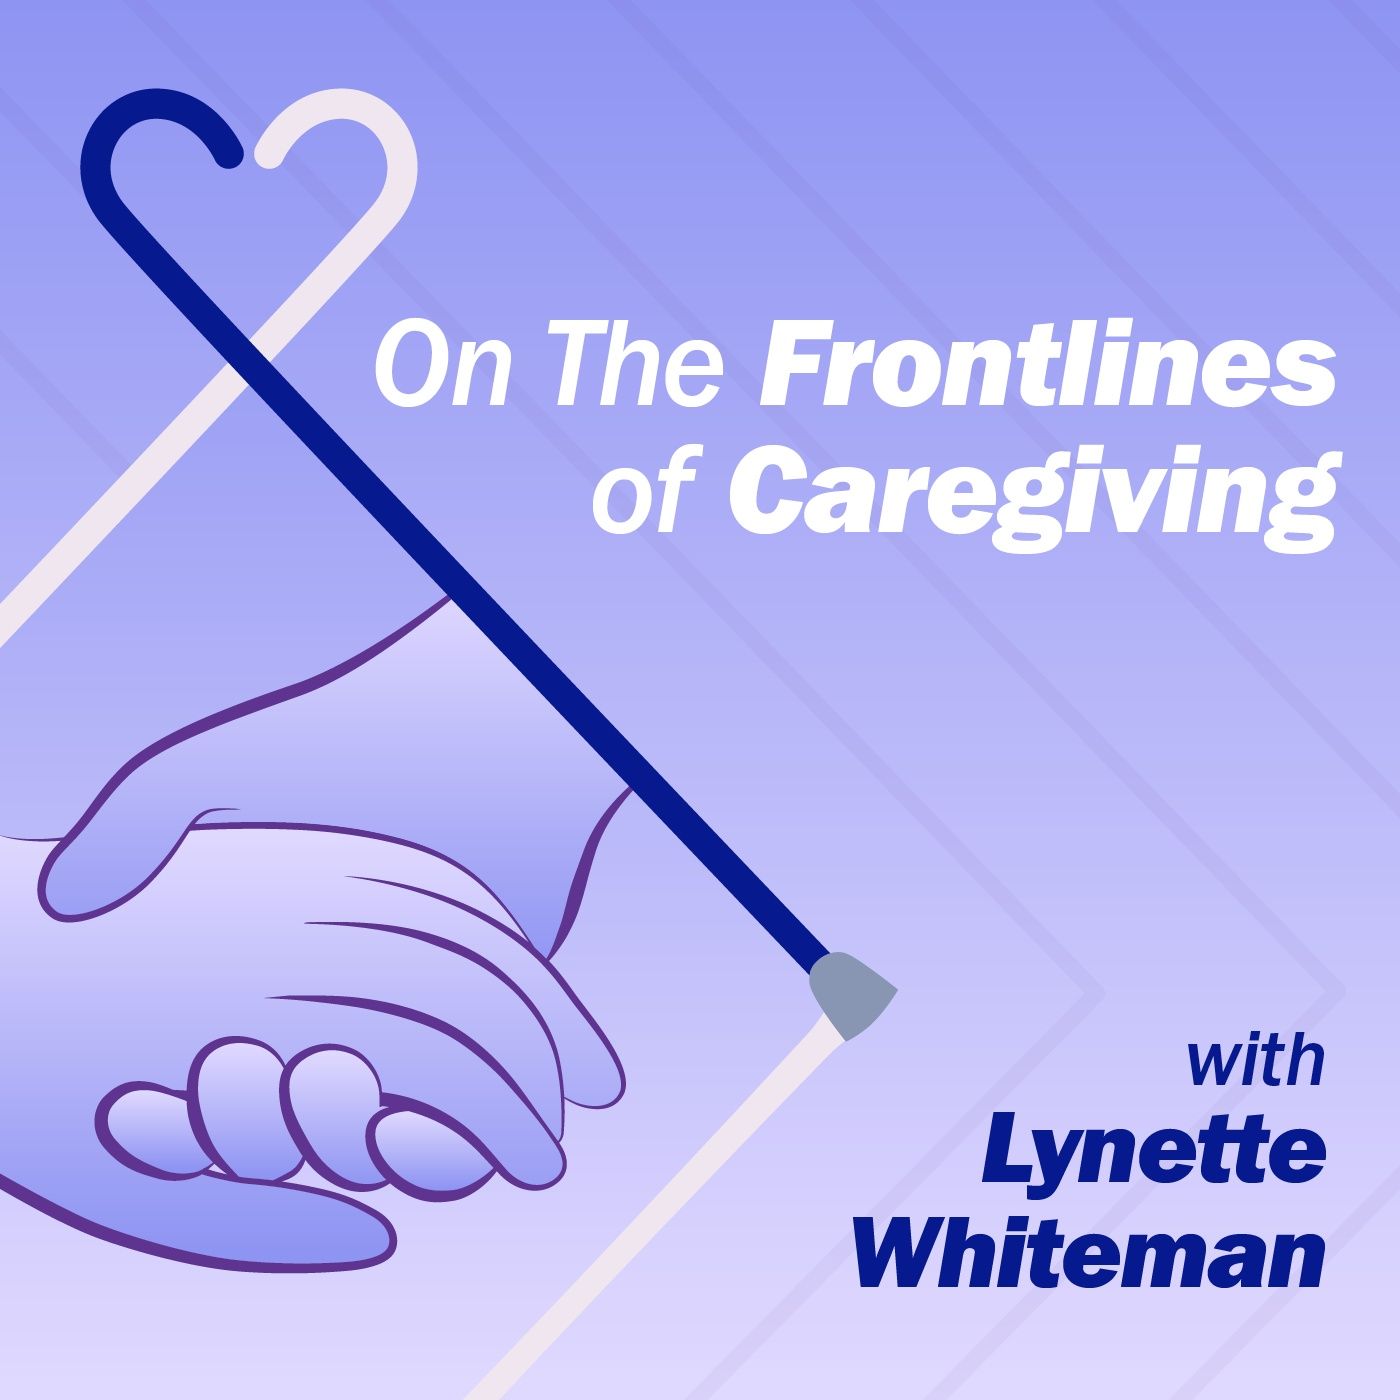 On The Frontlines of Caregiving